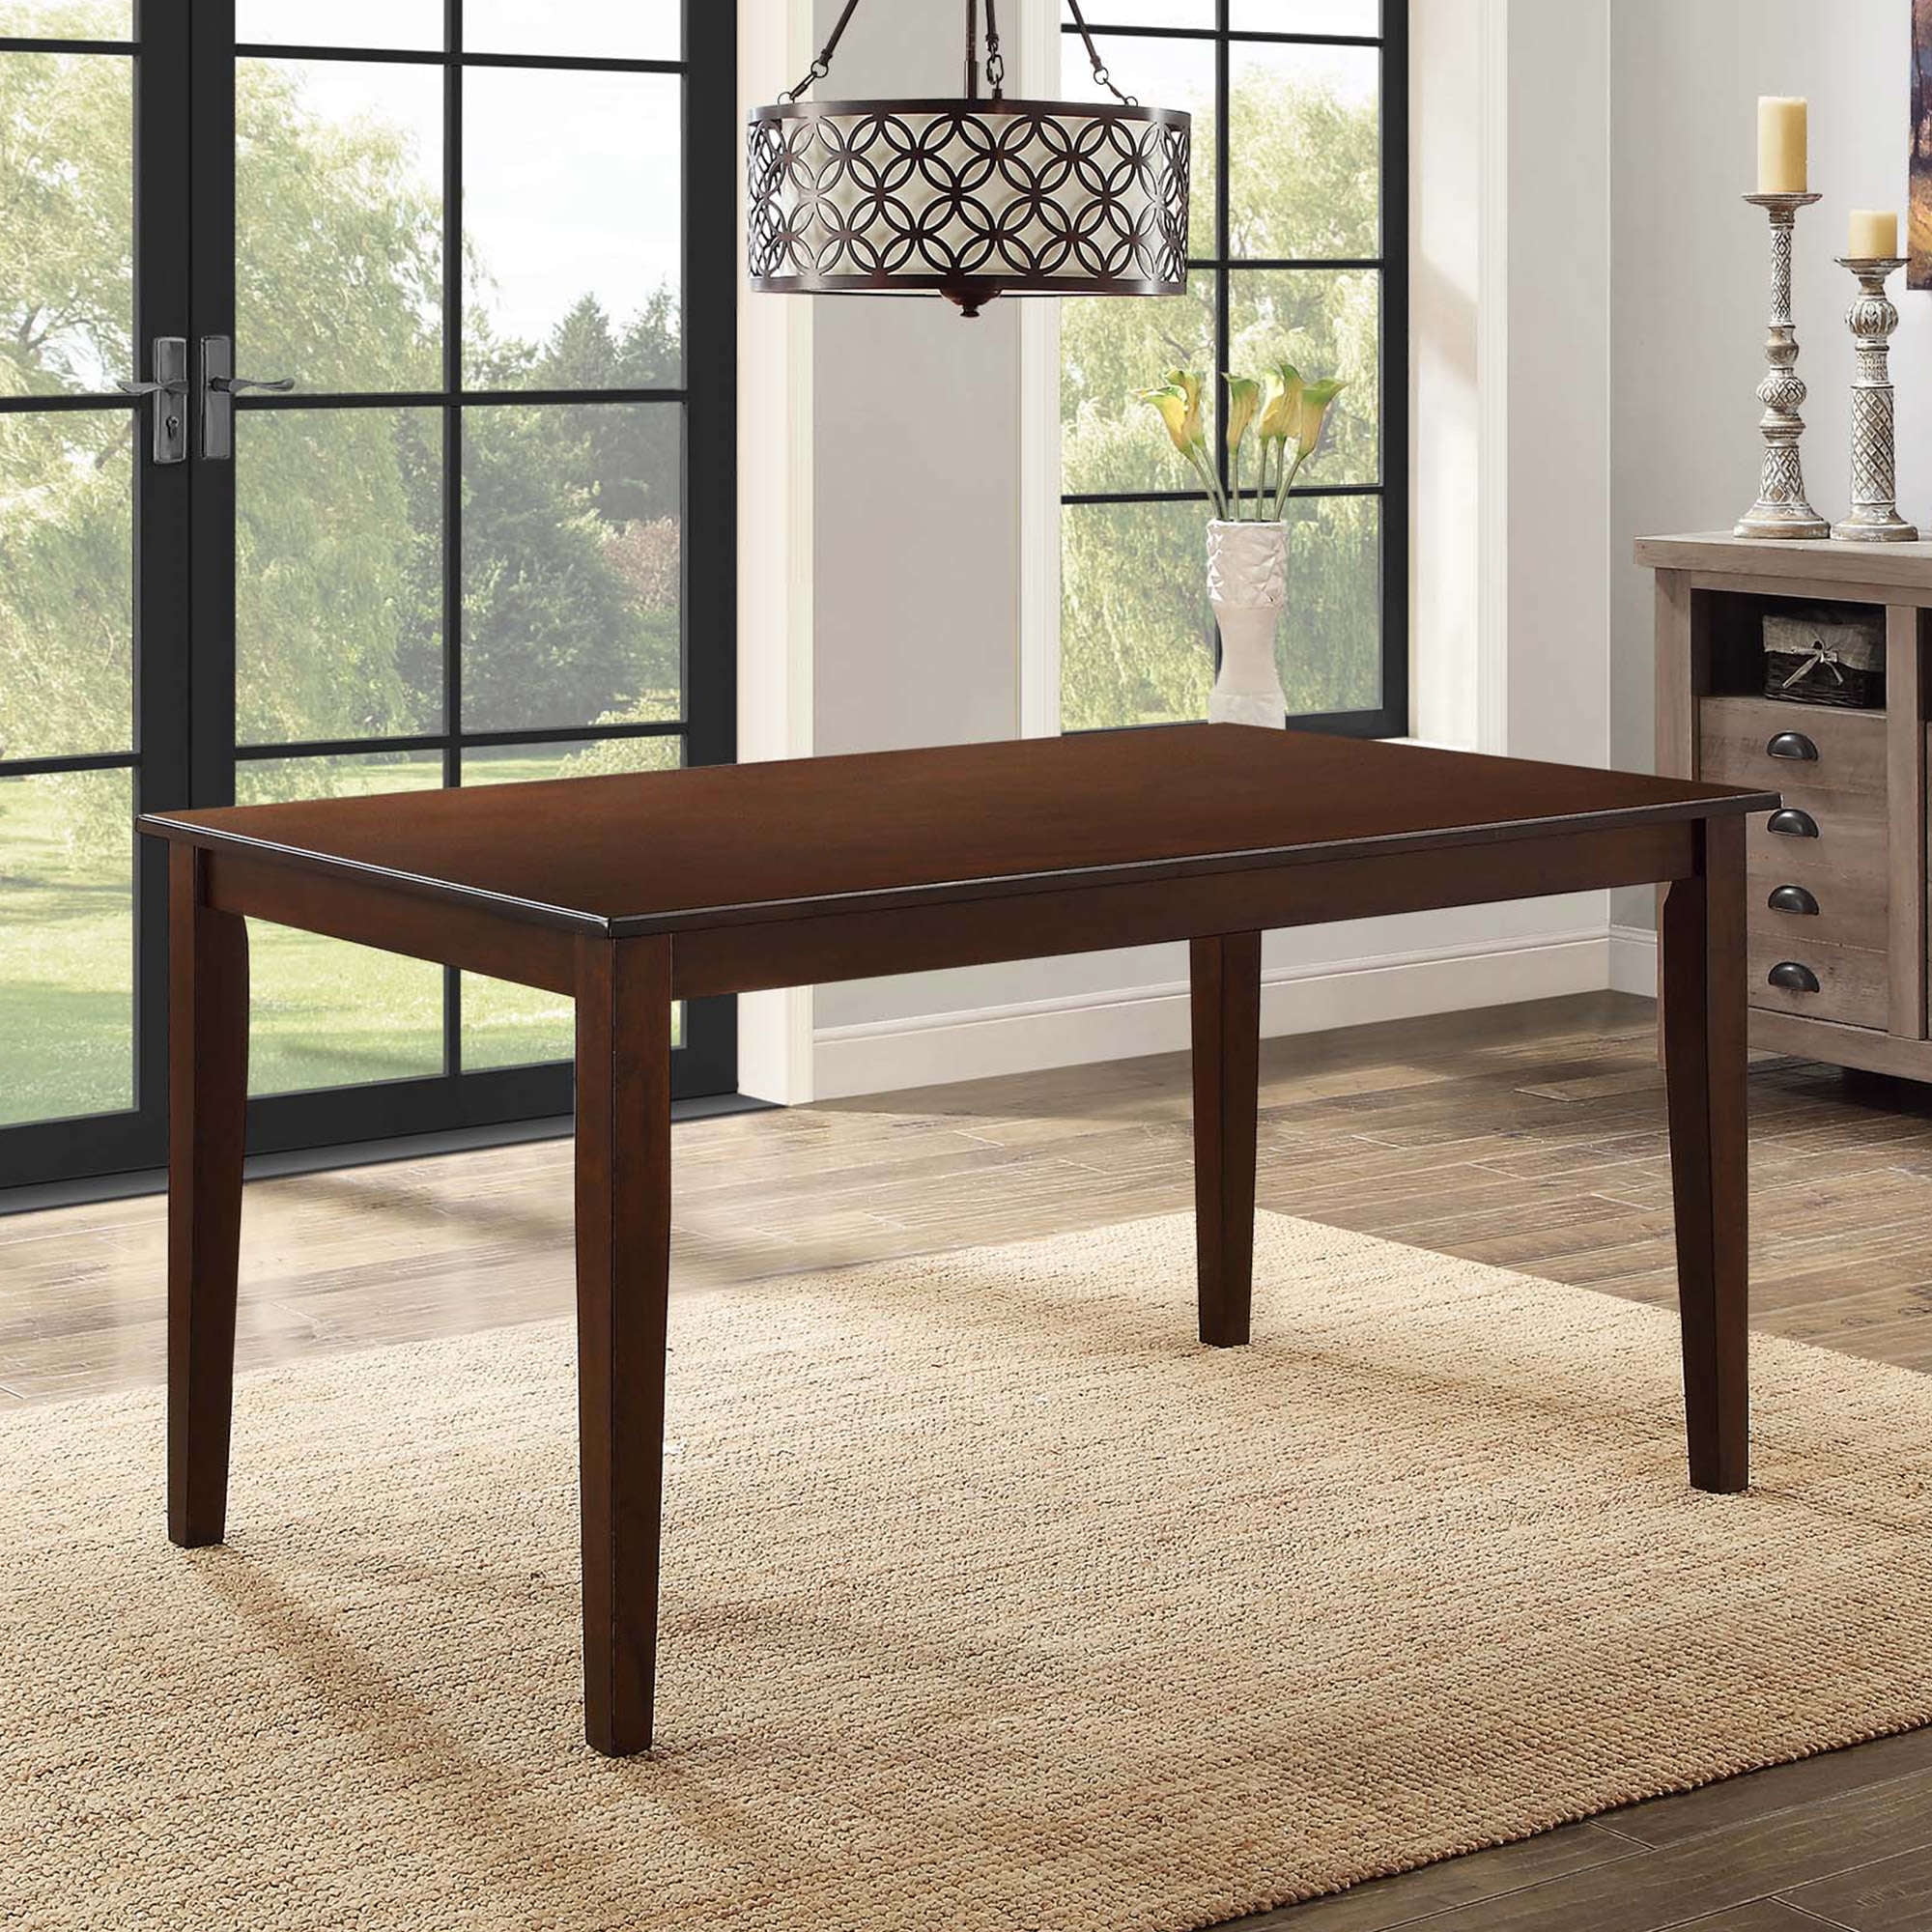 Better Homes Gardens Bankston Dining Table Multiple Finishes